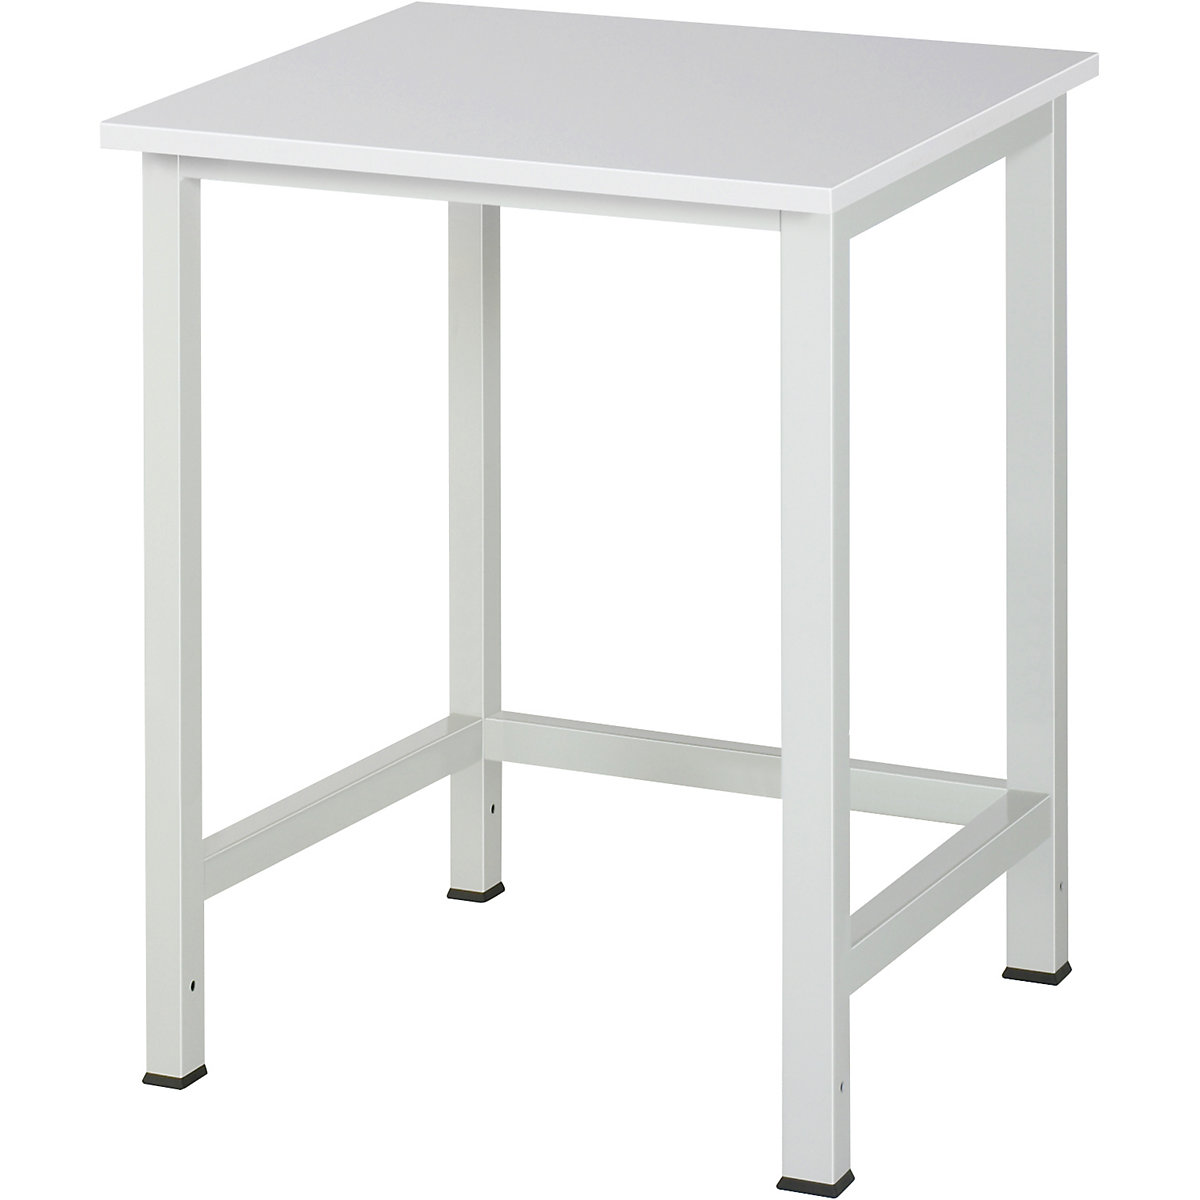 Work table for Series 900 workplace system – RAU, melamine coated, width 750 mm-6